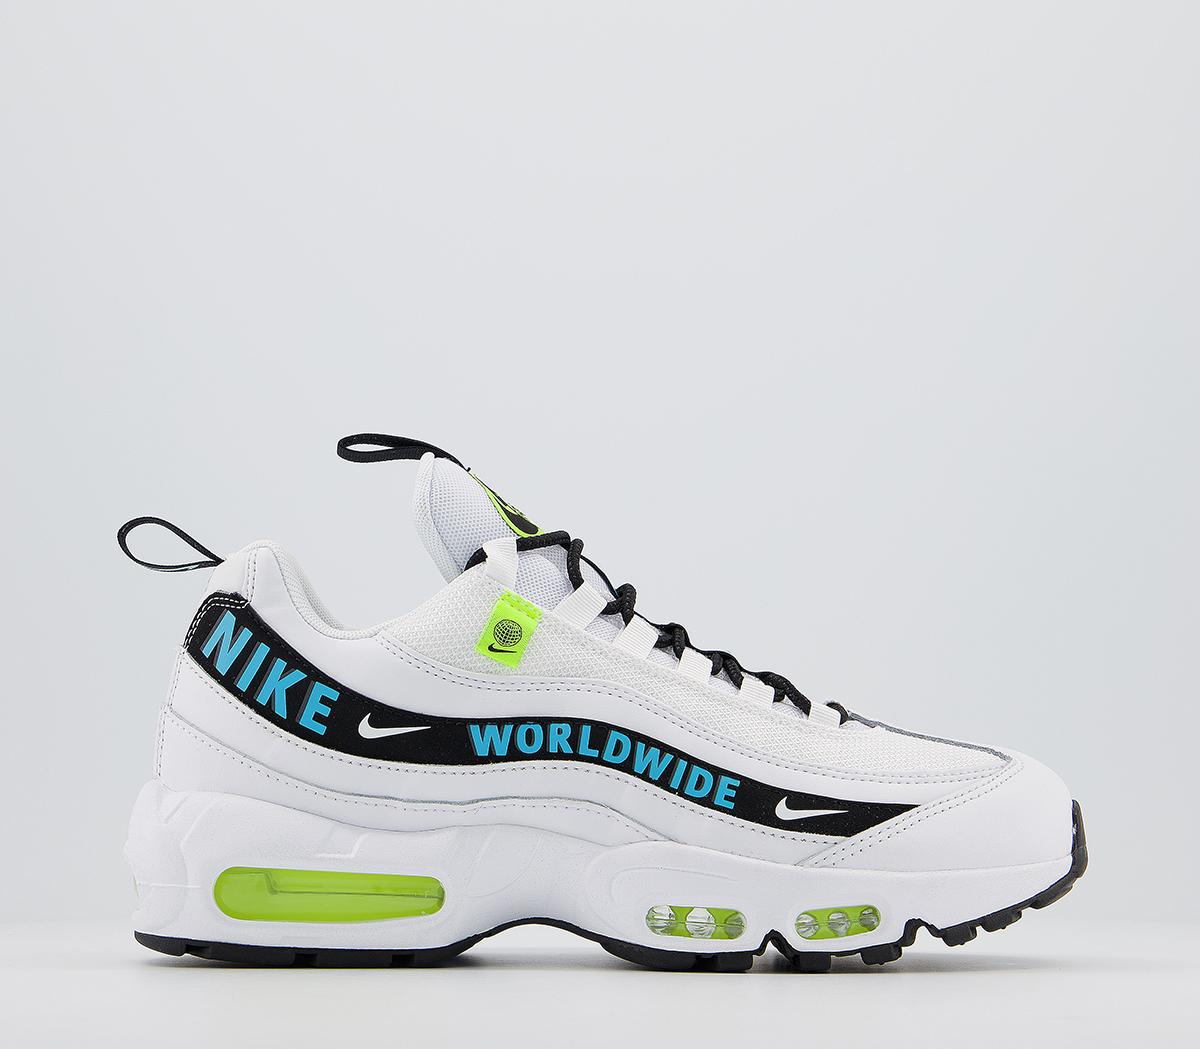 nike air max 95 trainers in blue